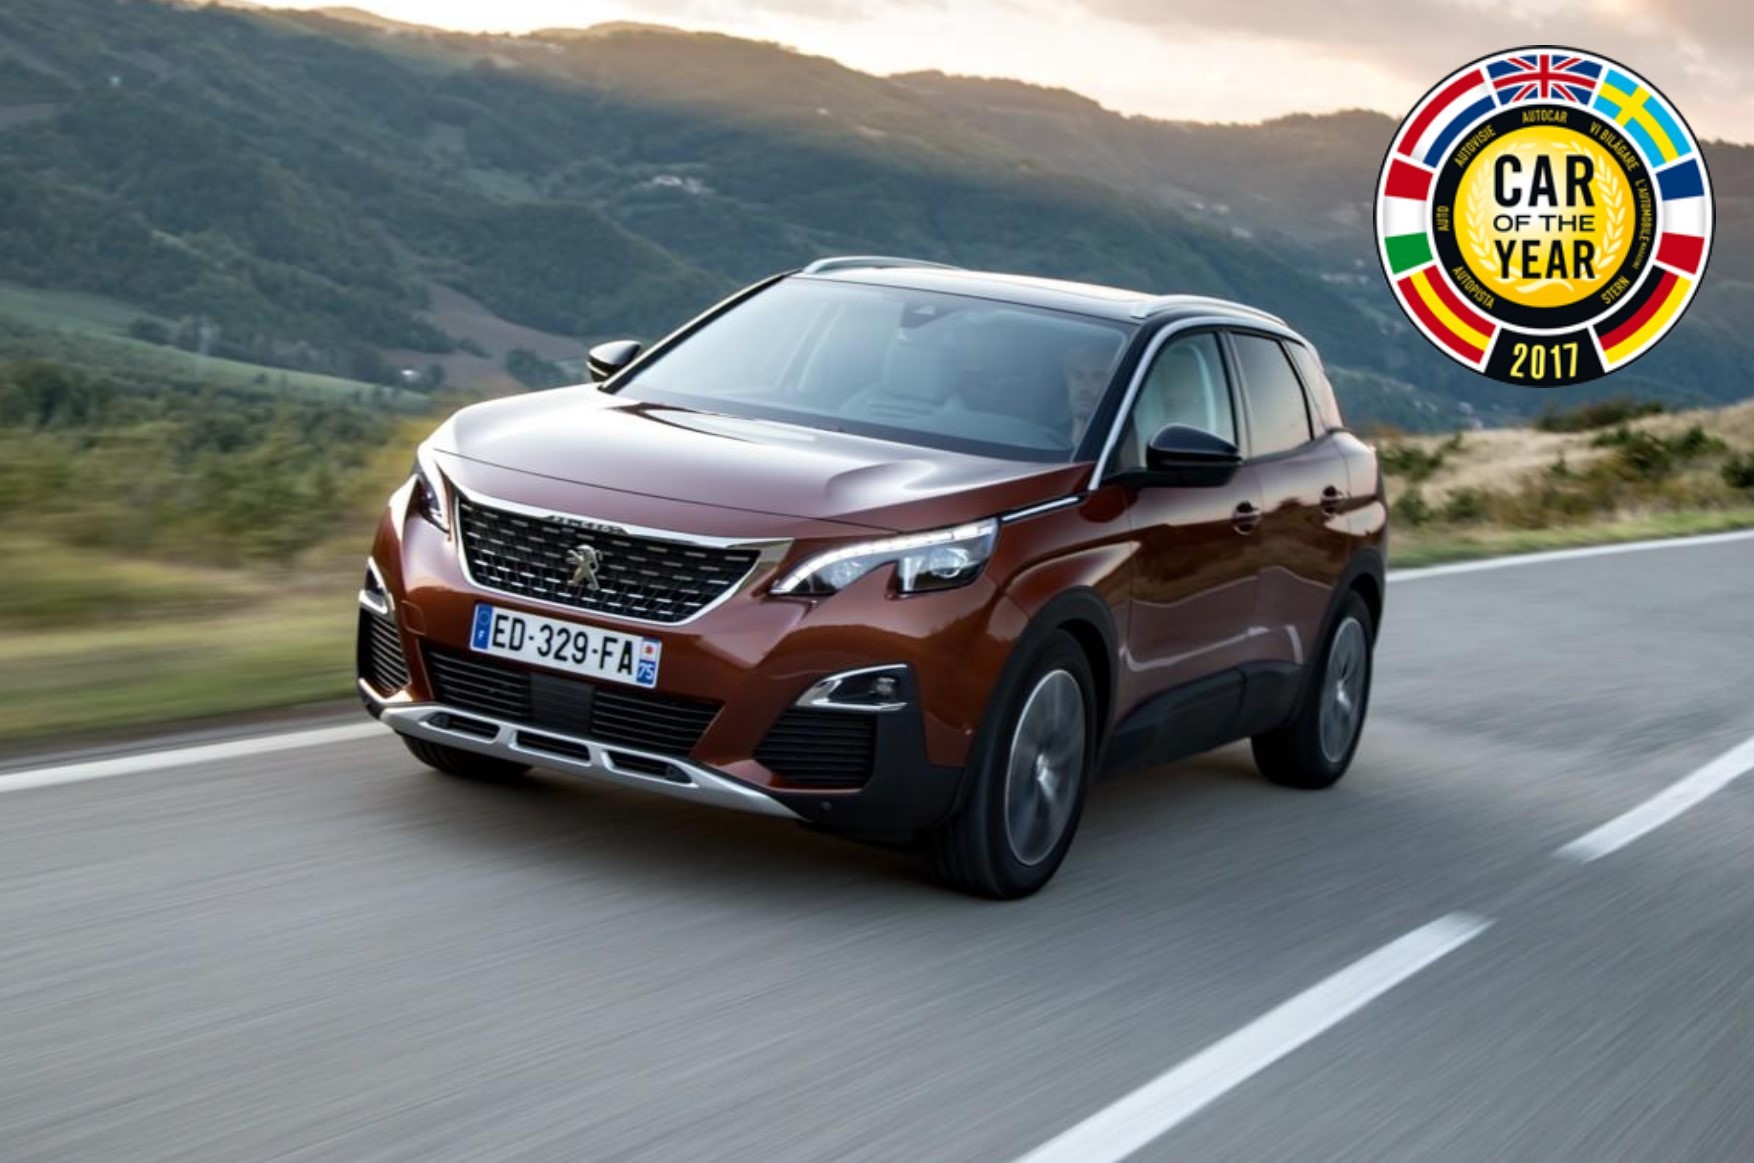 Peugeot 3008 Car of the year 2017